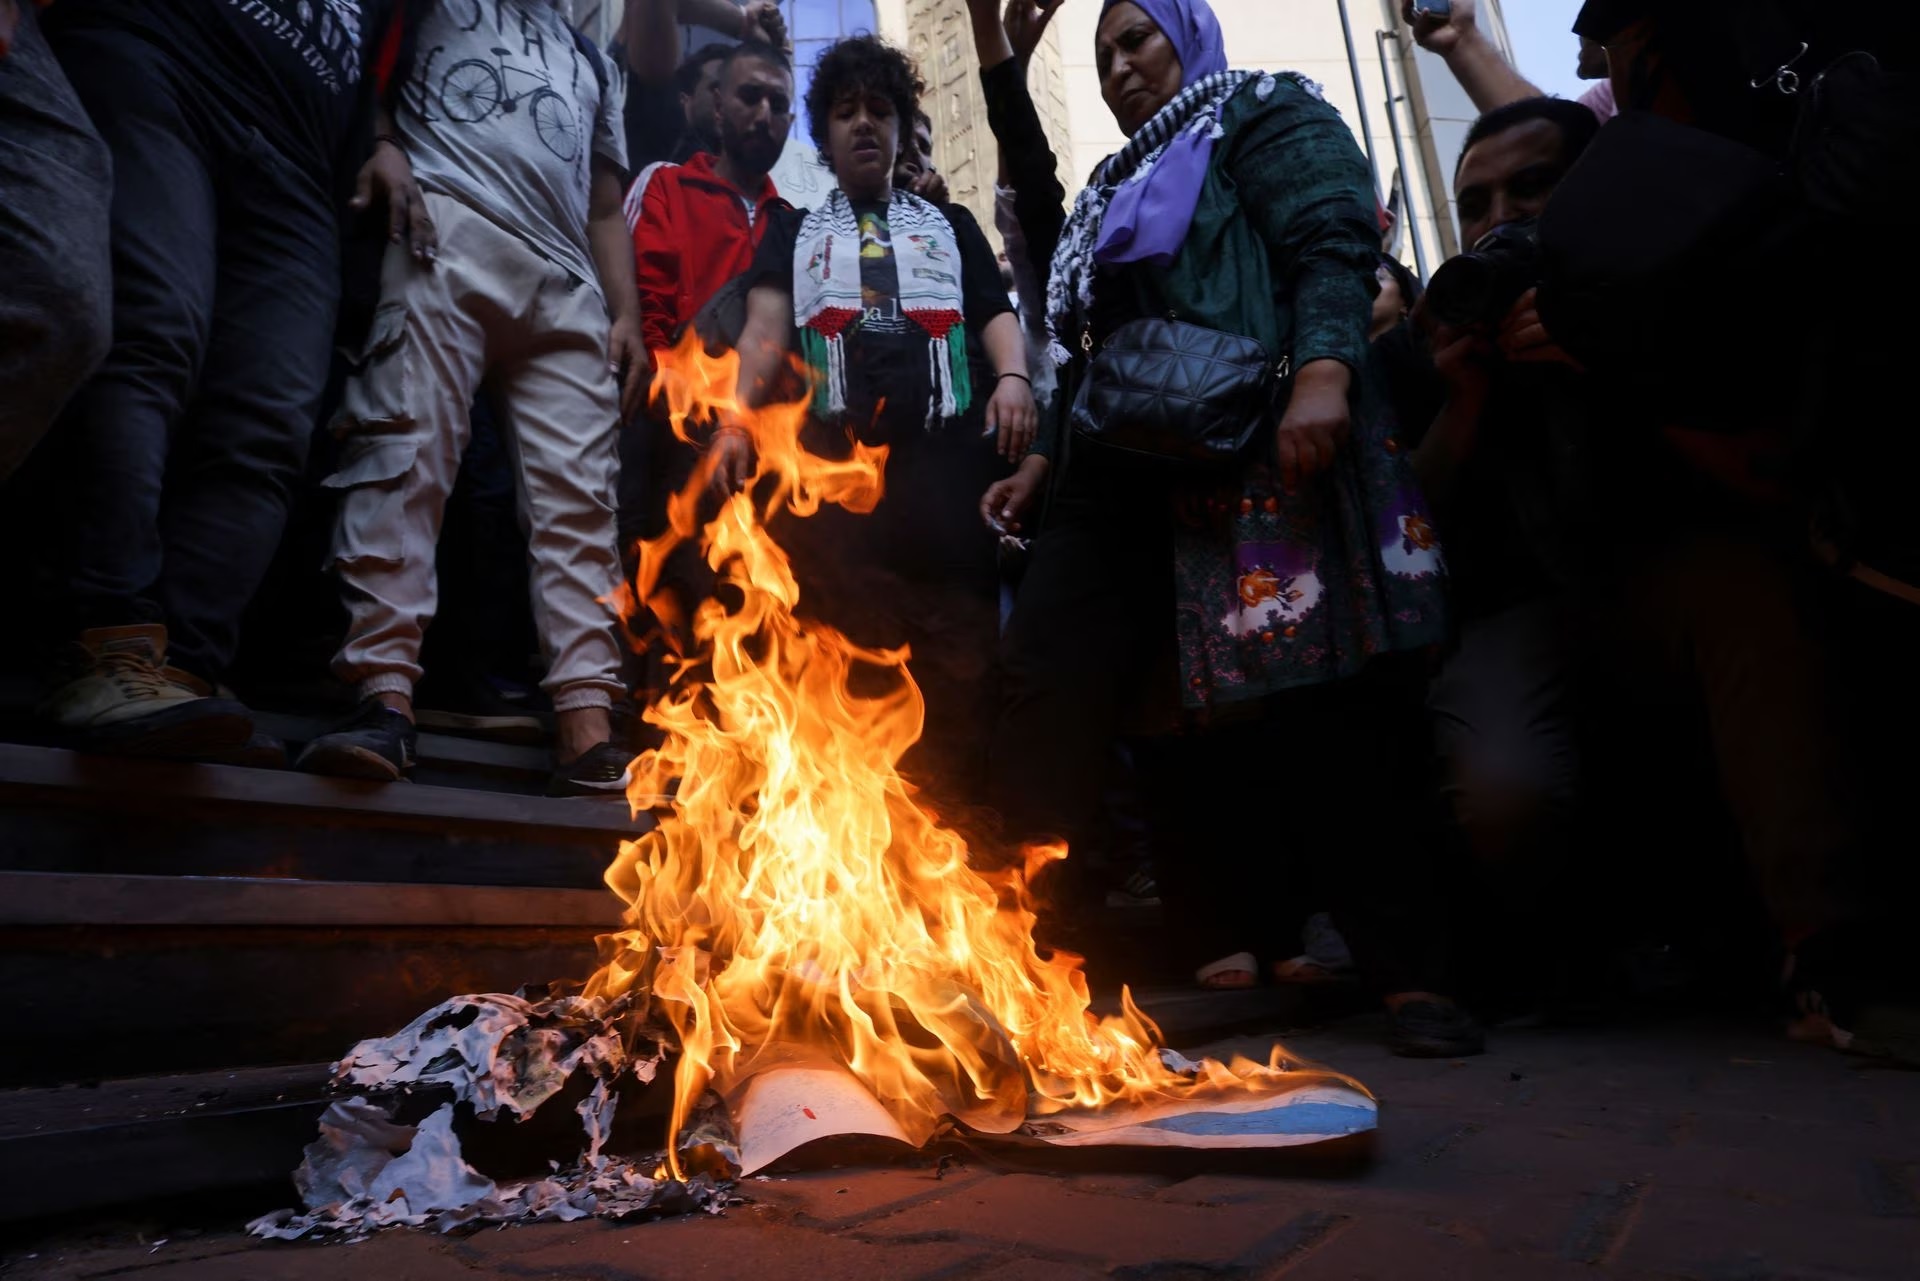 Egyptian dmonstrators stand near burning banners depicting the Israeli flag as they protest against Israel and the USA in support of Palestinians for those killed in an Israeli blast at Al-Ahli hospital in Gaza.